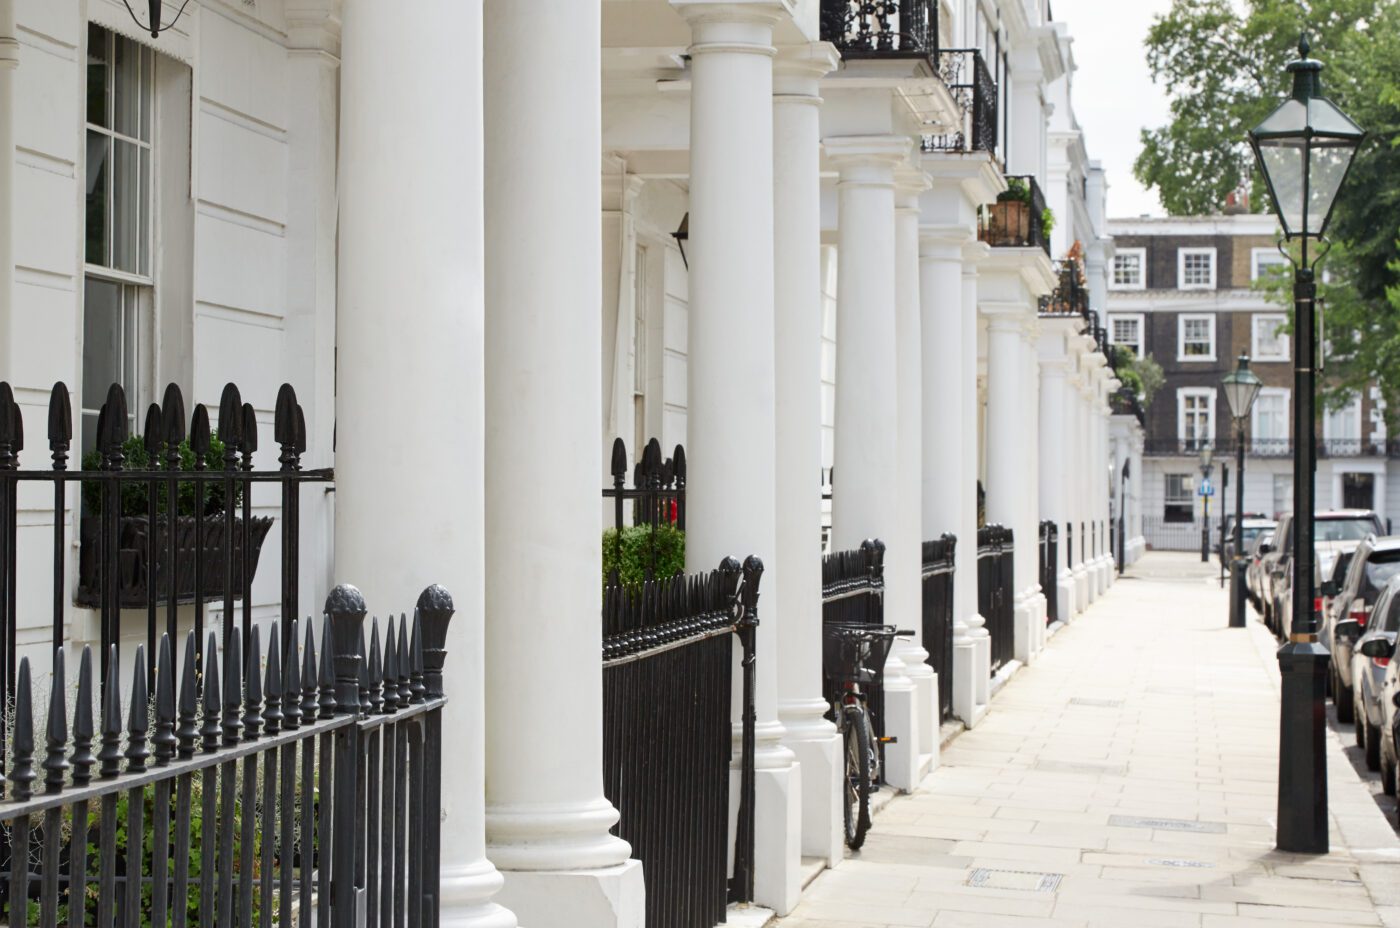 Property Management Consultants in Prime Central London. A London Buying Agent specialising in heritage property.